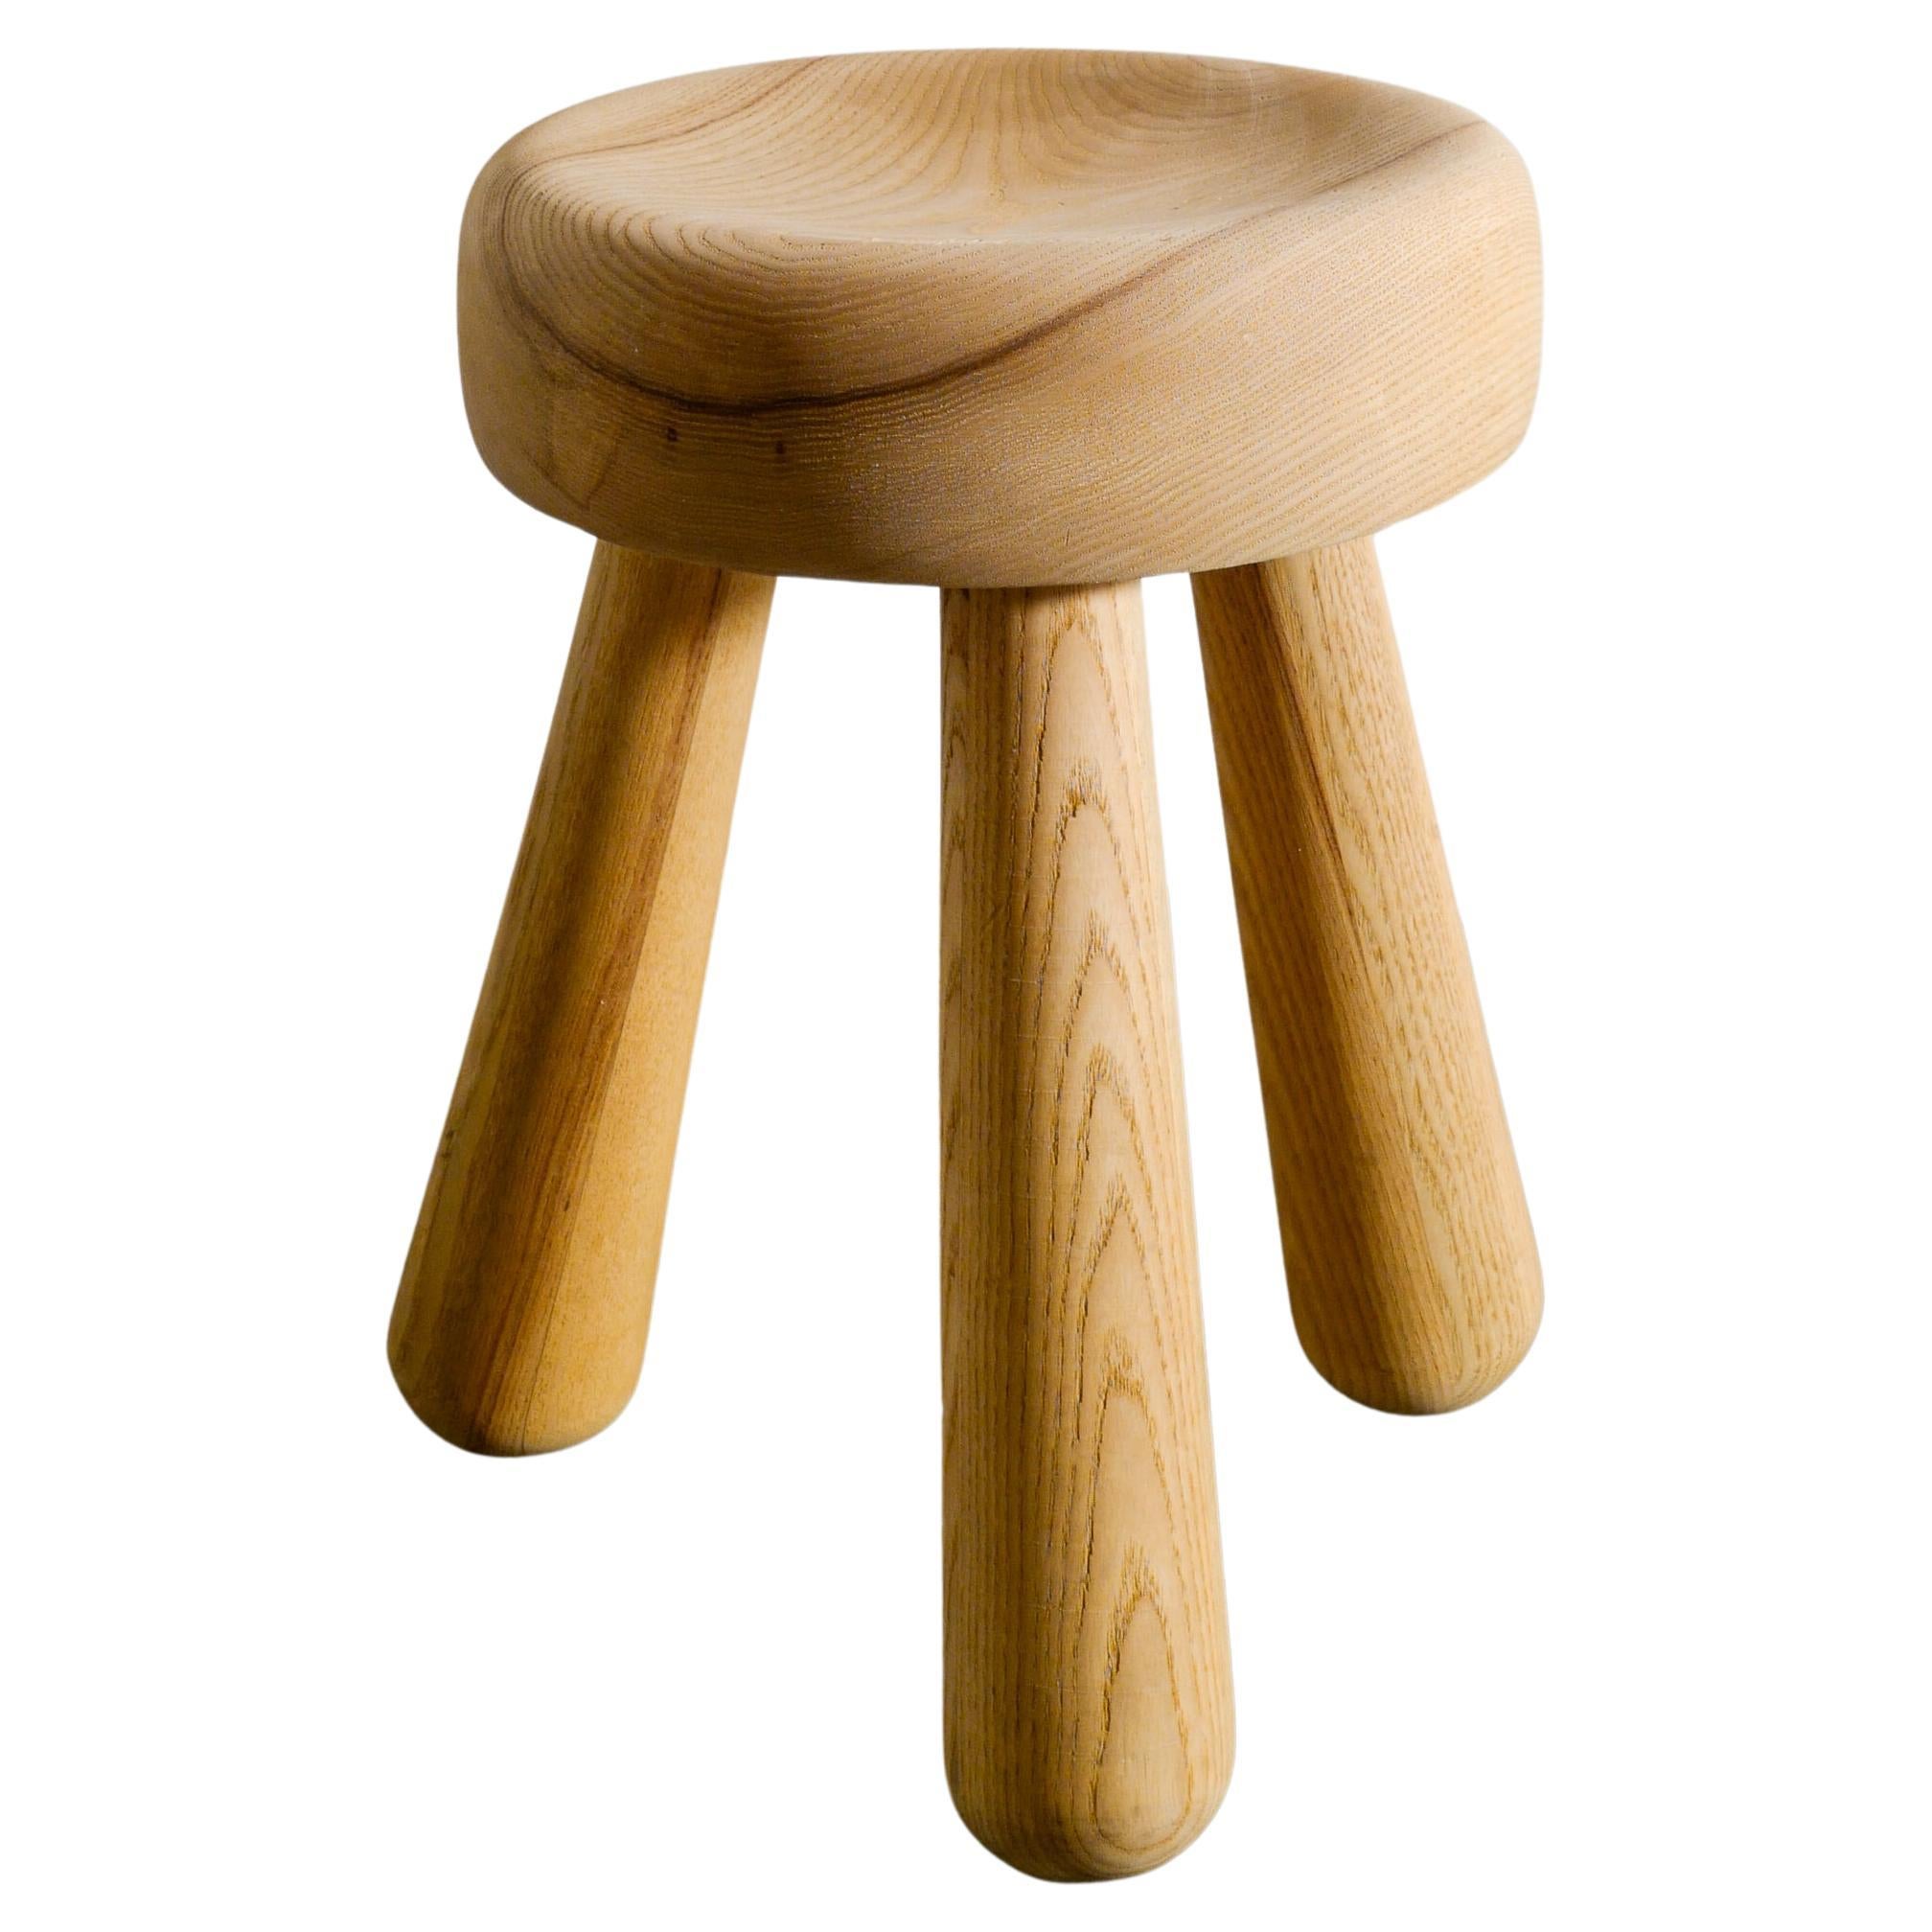 Wooden Low Mid Century Stool in Ash by Ingvar Hildingsson, 1970s For Sale